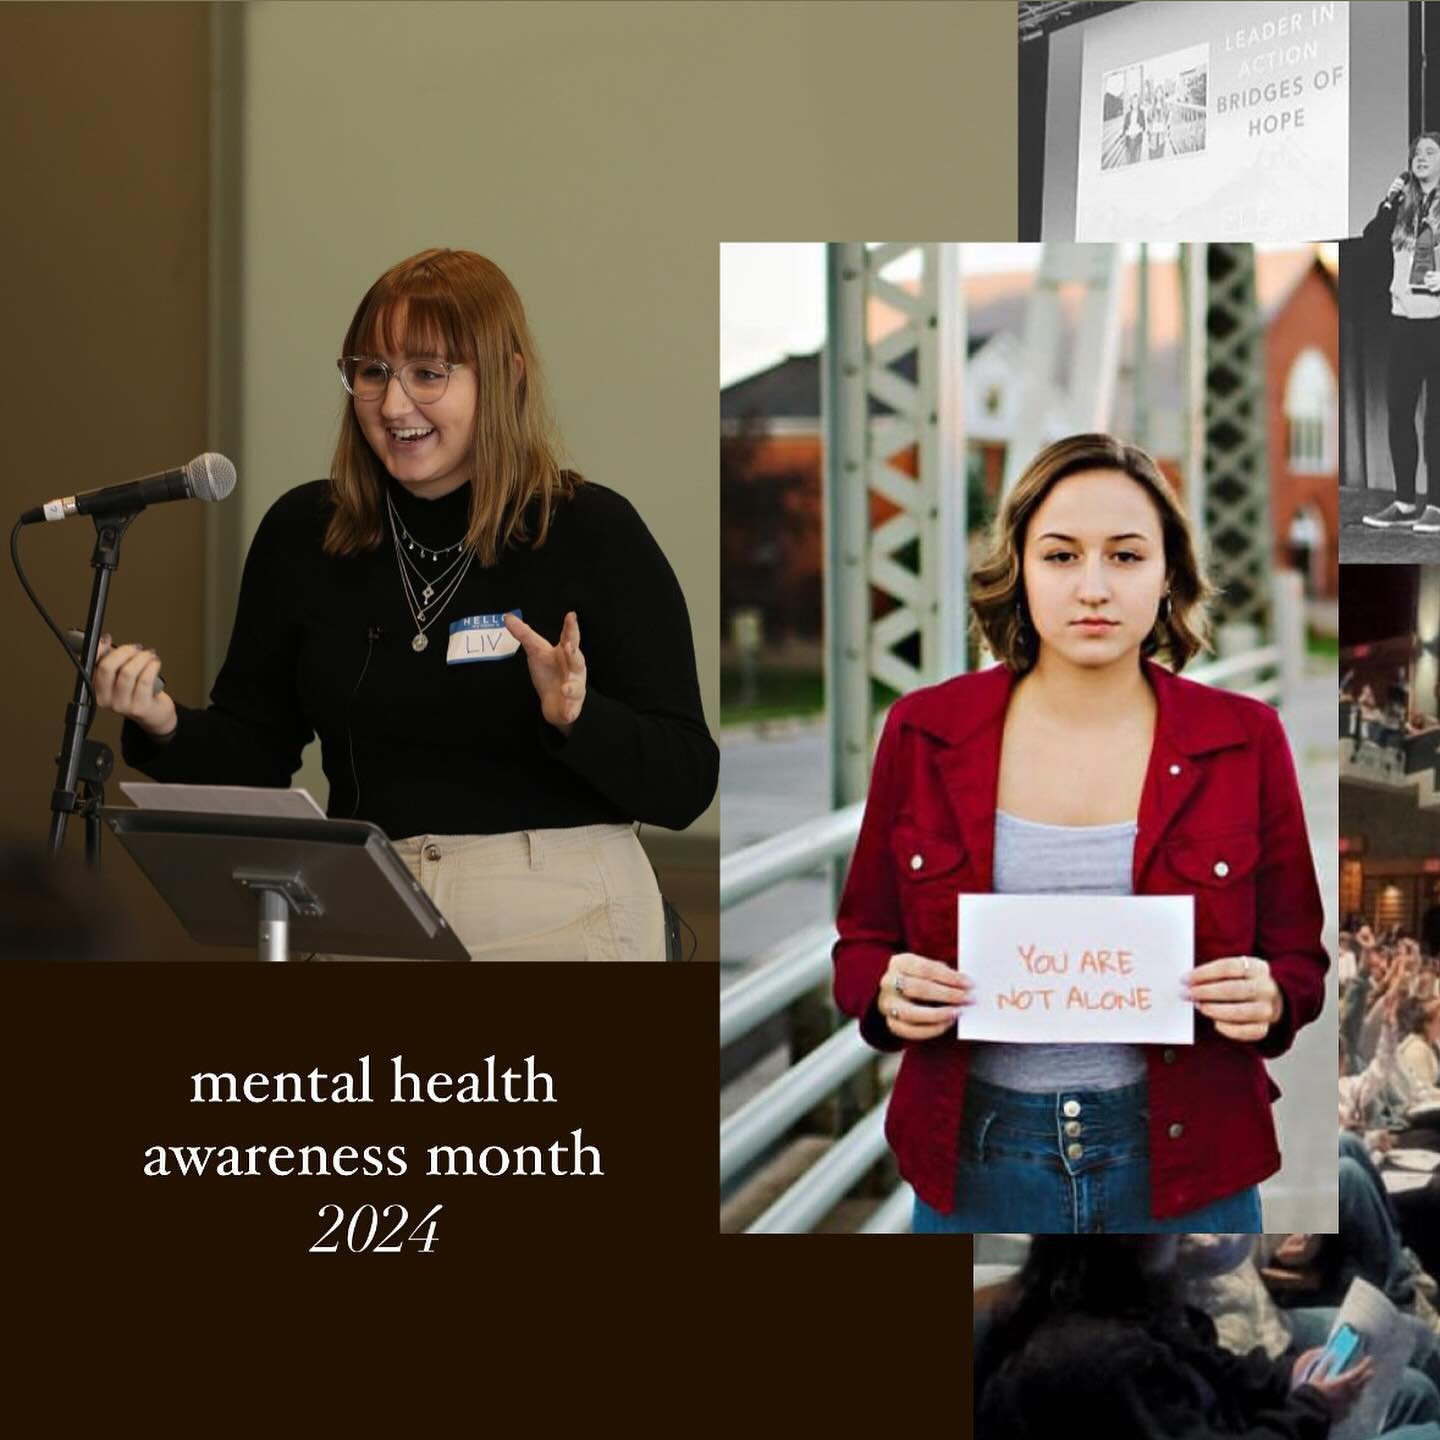 For a long time, I didn&rsquo;t know who I was outside of the person who talked about mental health a lot. 

I love that person in these photos very much. She&rsquo;s tenacious, persistent and optimistic. Dares to say yes. Craves connection. 

But th